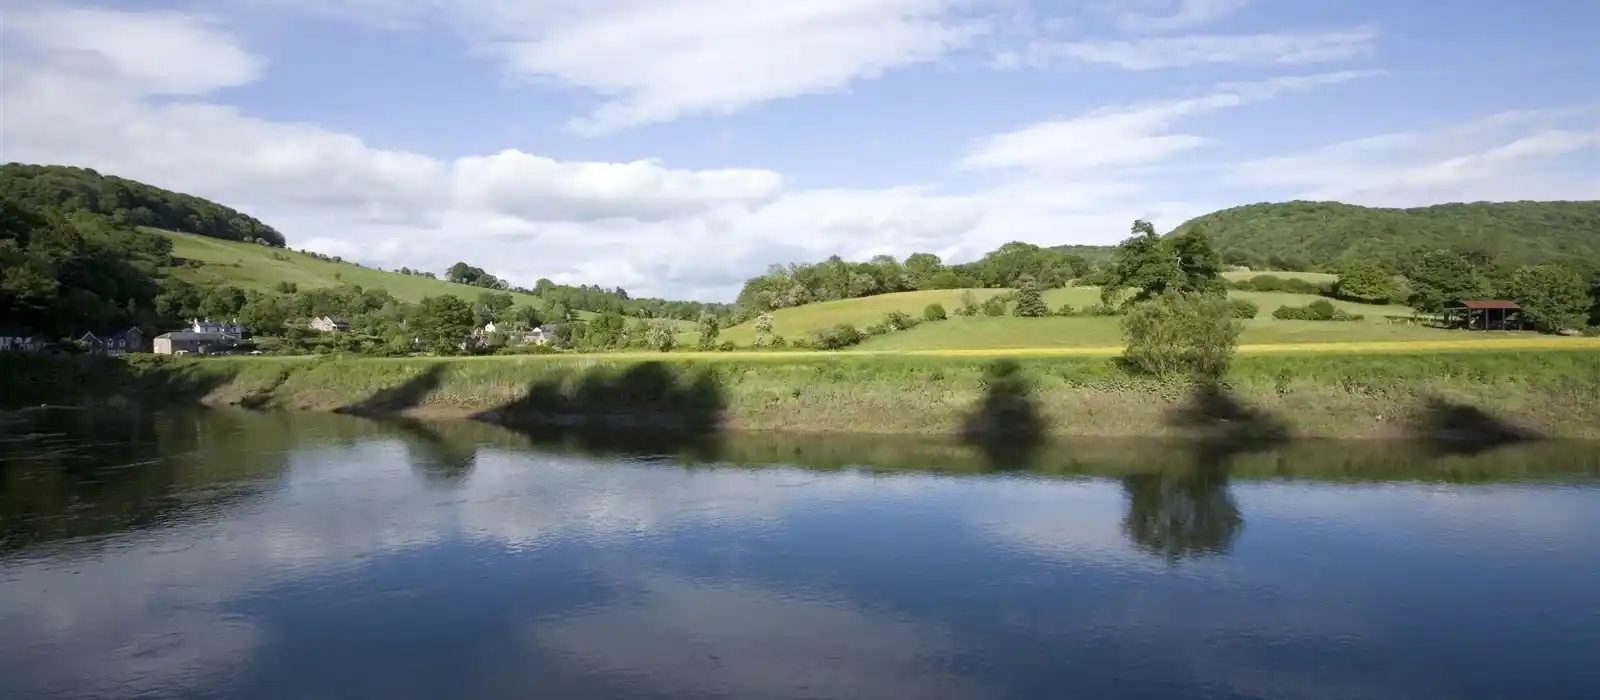 The River Wye, Monmouthshire